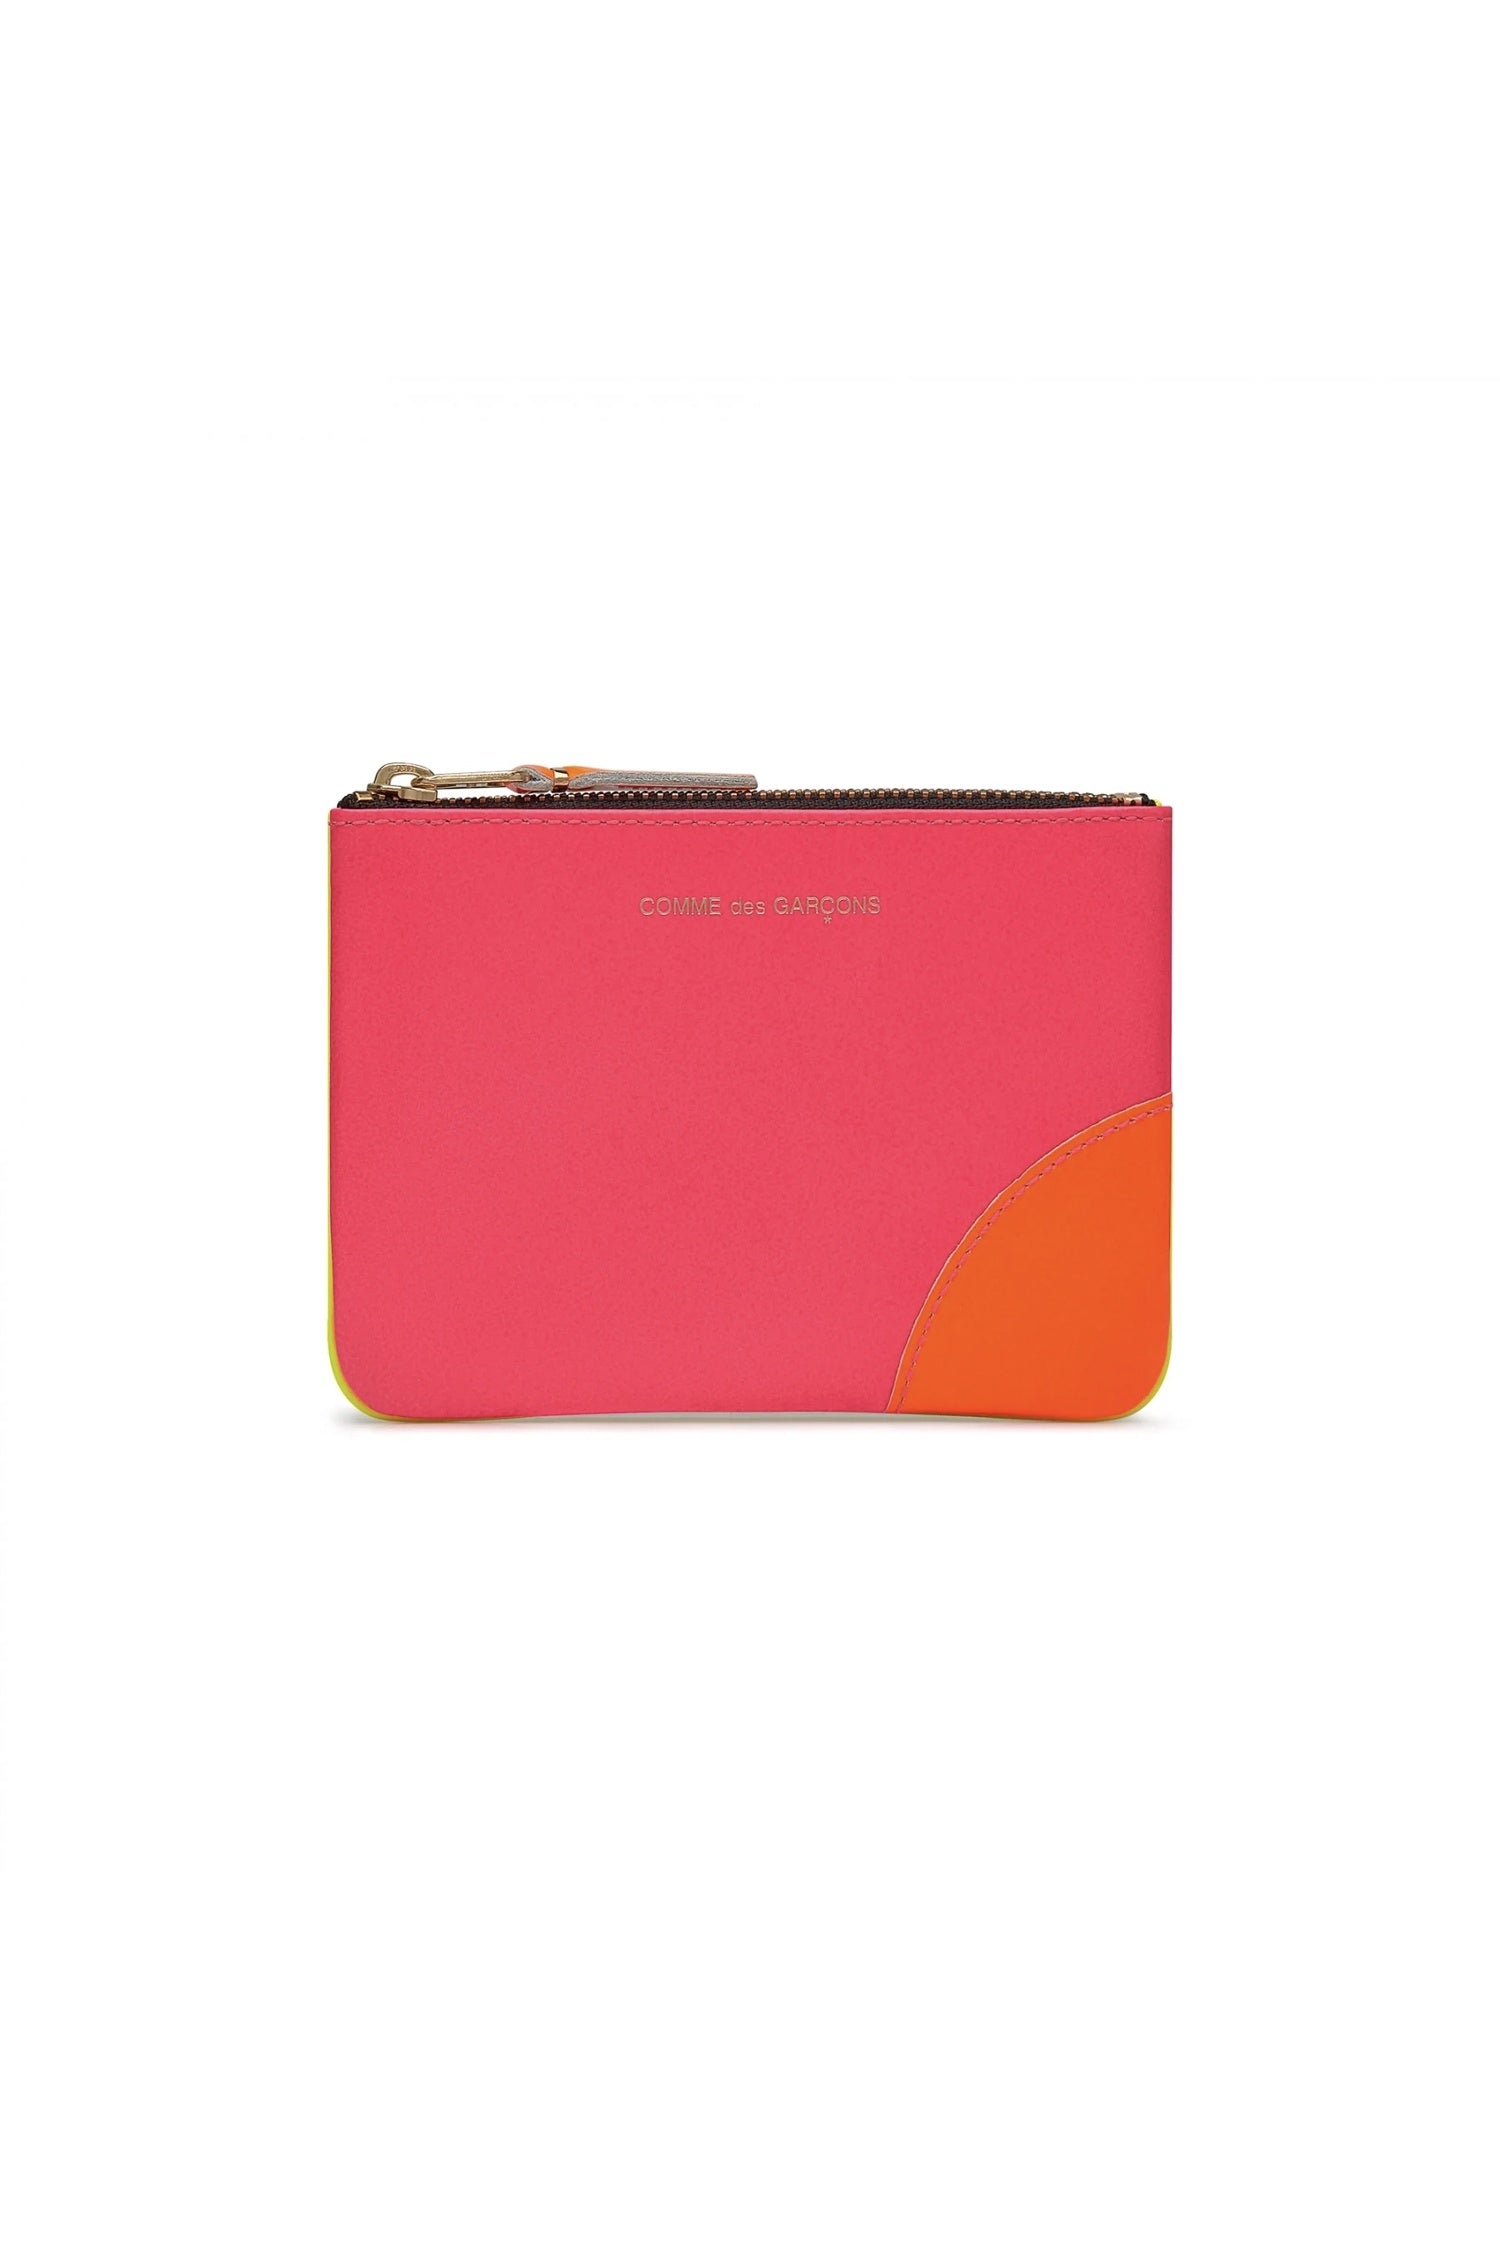 SUPER FLUO WALLET IN PINK/YELLOW, W24